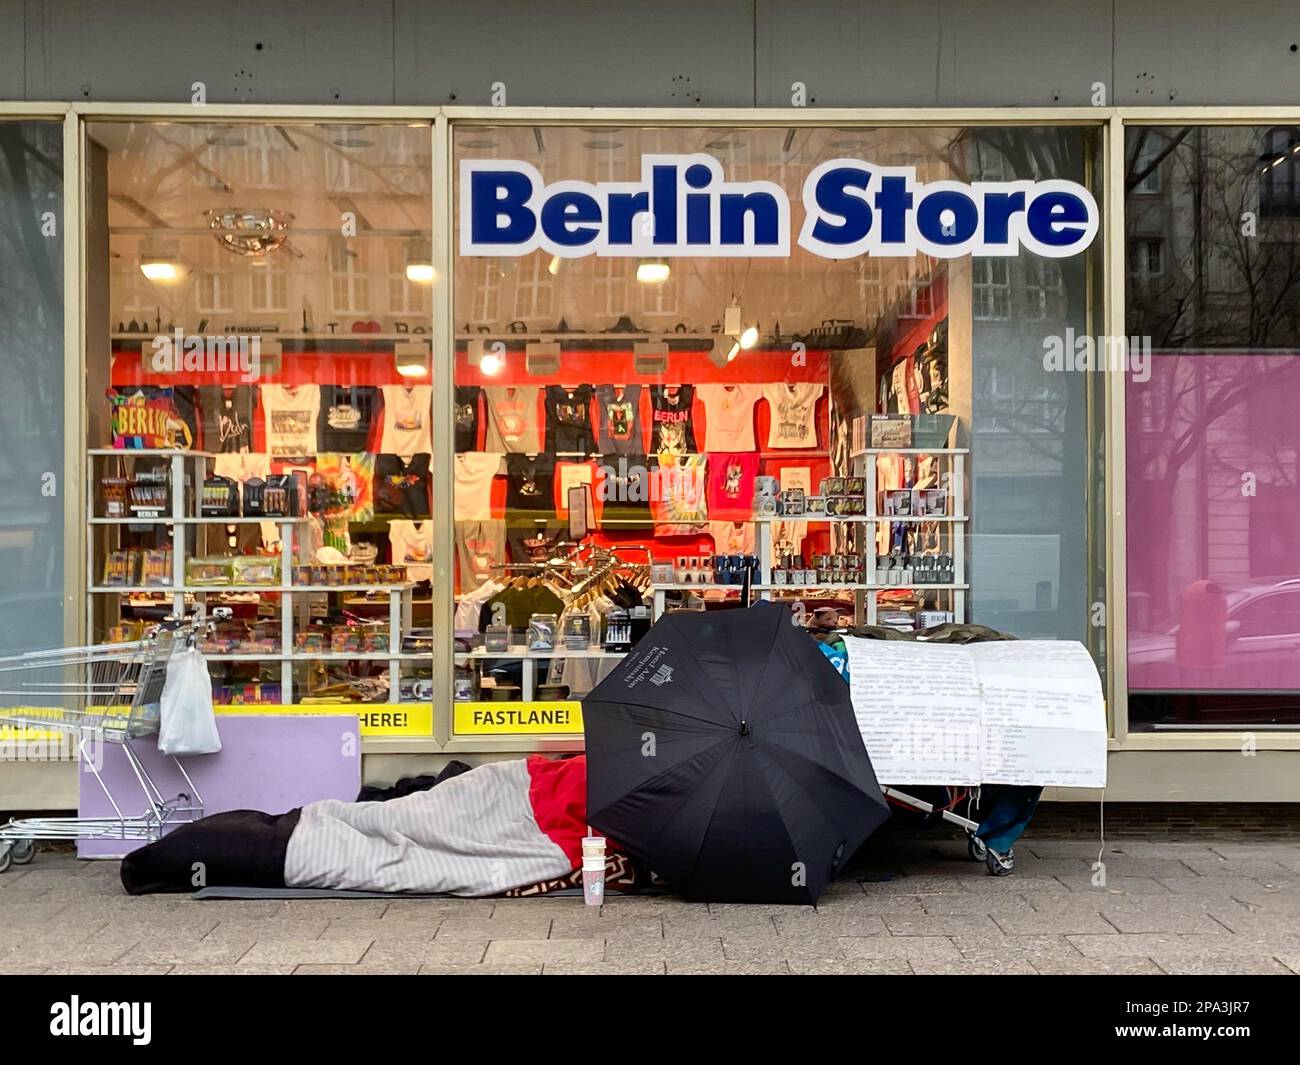 Homeless person in front of 'Berlin Store', covered by an umbrella from Hotel Adlon in central Berlin, Germany in February 2023. Stock Photo